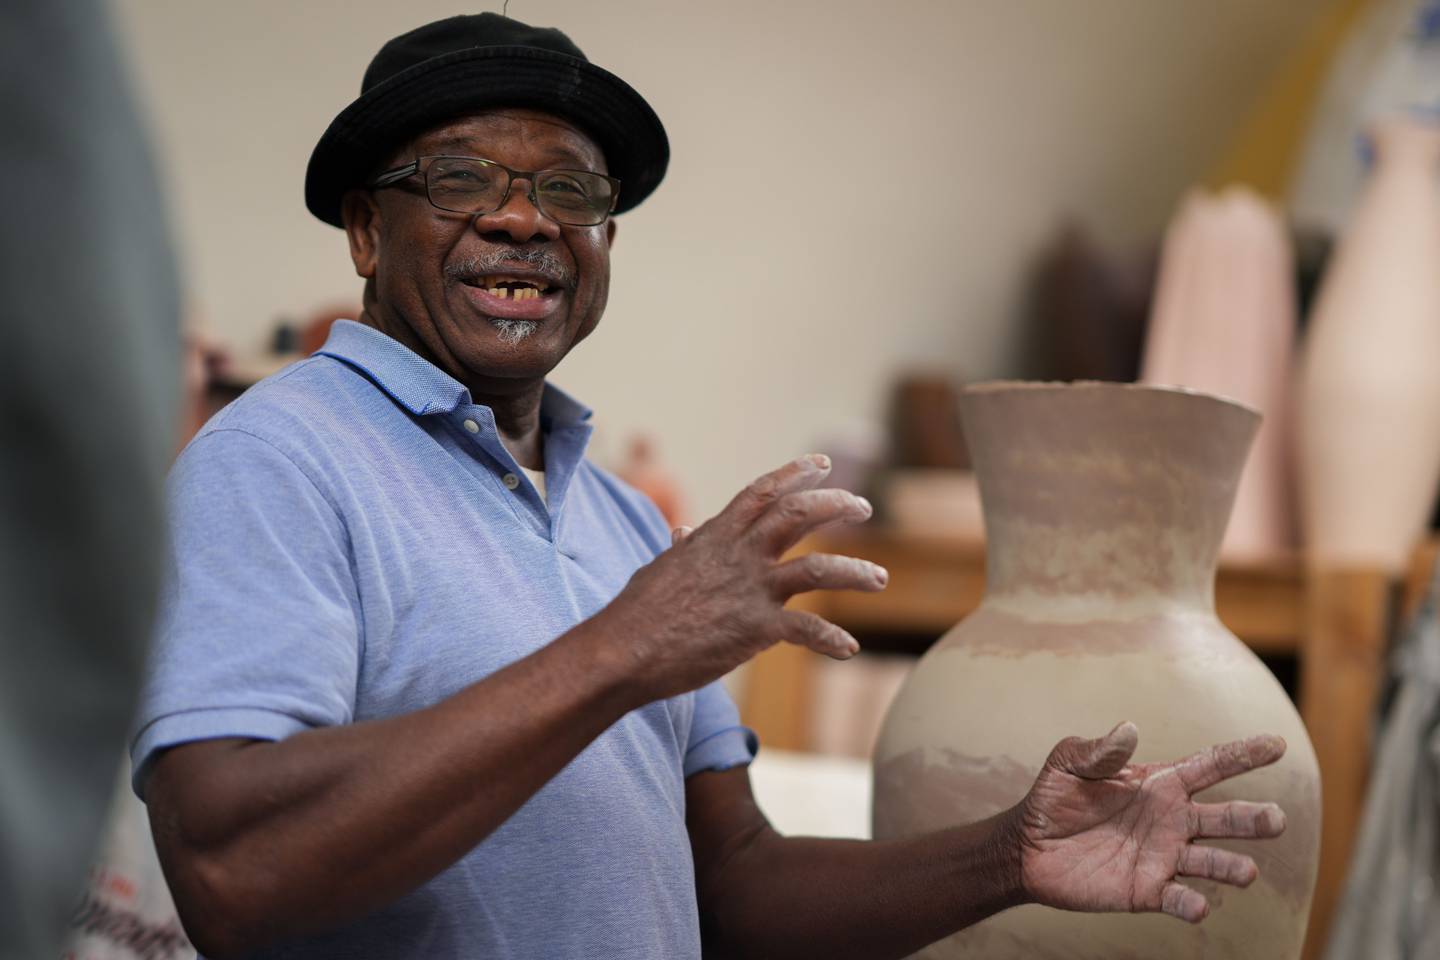 Sam Wallace, a Jamaican-American pottery artist, is interviewed in his section of the Baltimore Clayworks studio on 11/30/22. Wallace has become a mainstay of the local artist community and for columnist Leslie Streeter, buying and giving his pieces has become a holiday tradition.